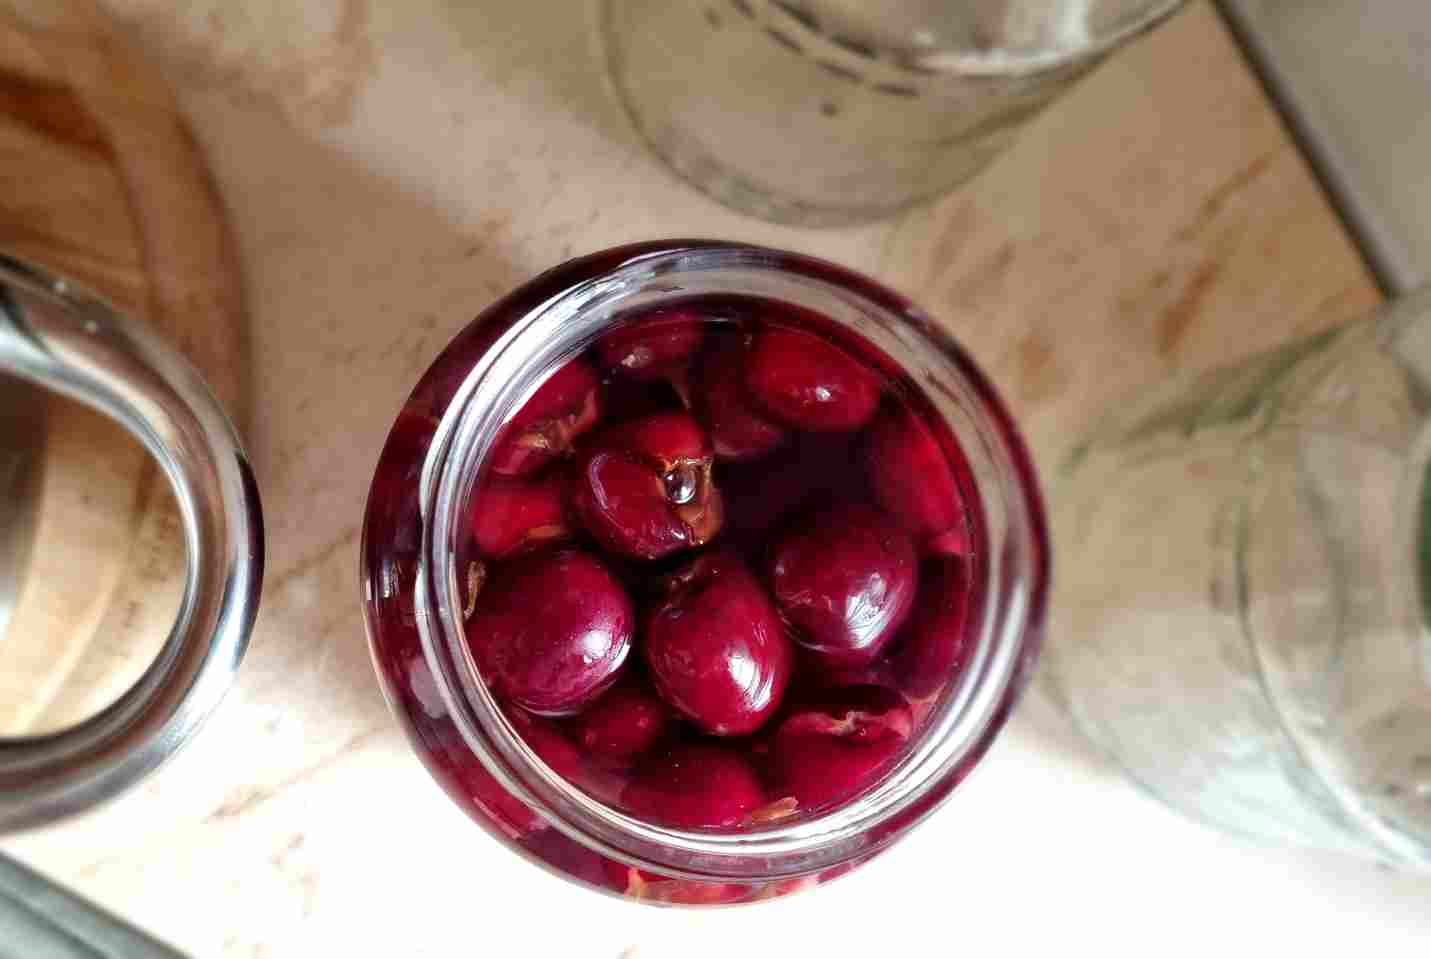 How to Make Canned Cherries at Home